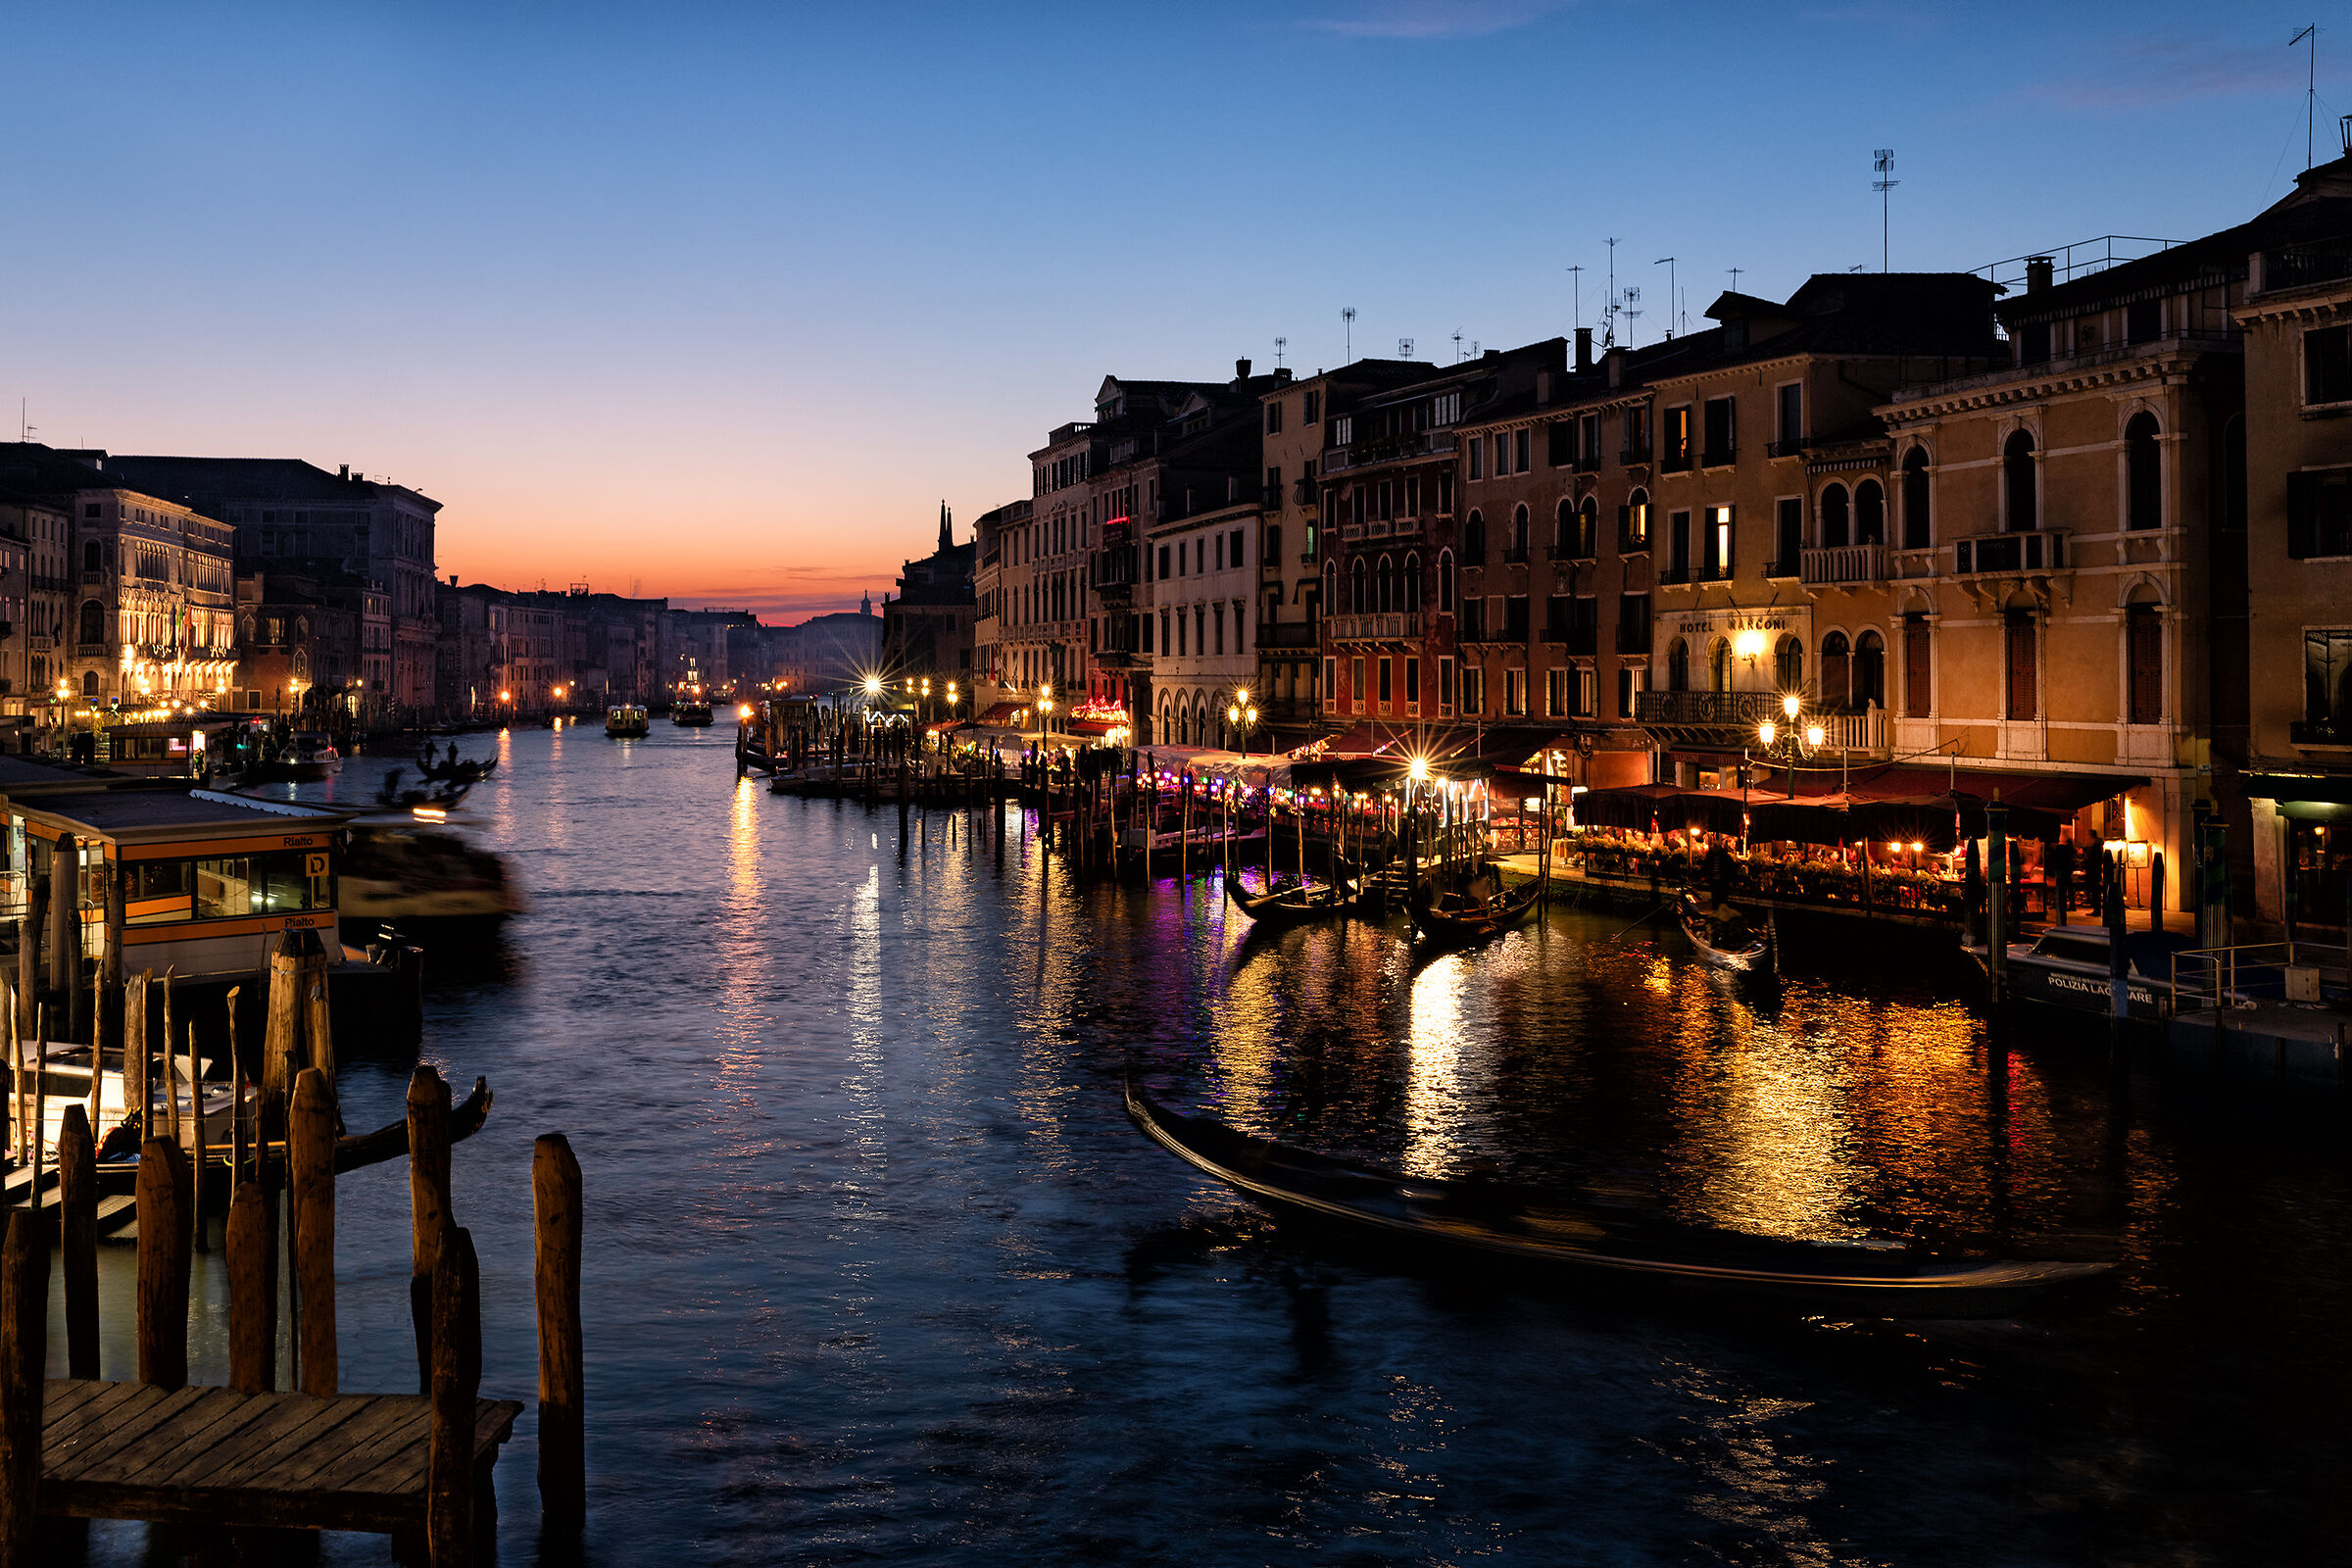 Lights on the water, a Venetian classic...